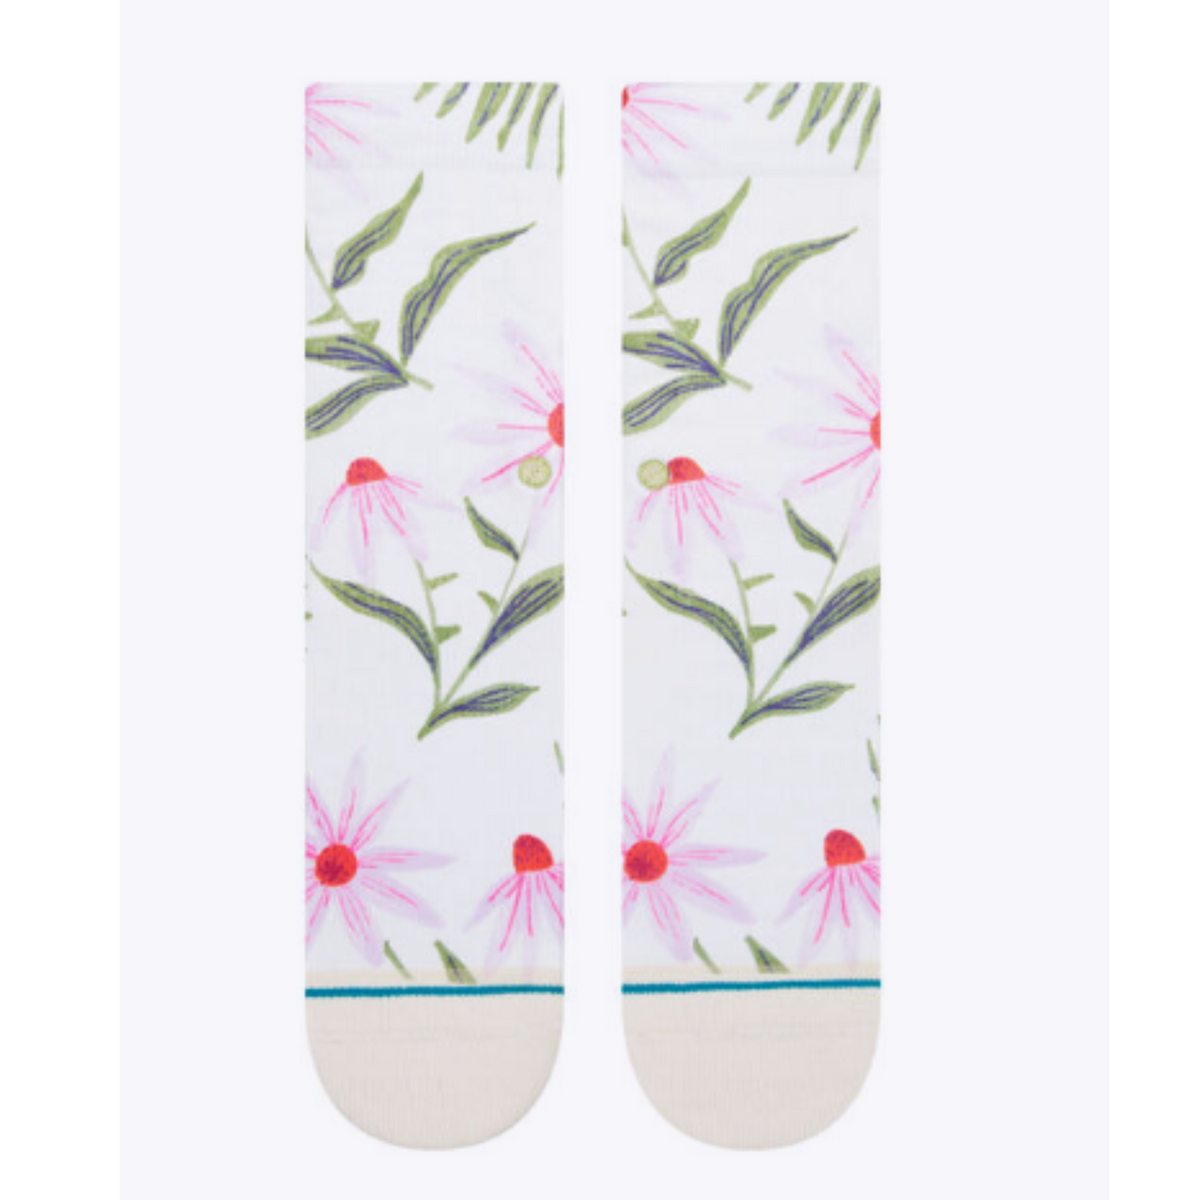 Top of Stance Flaunt women&#39;s crew sock featuring white sock with pink flowers and green leaves and stems.